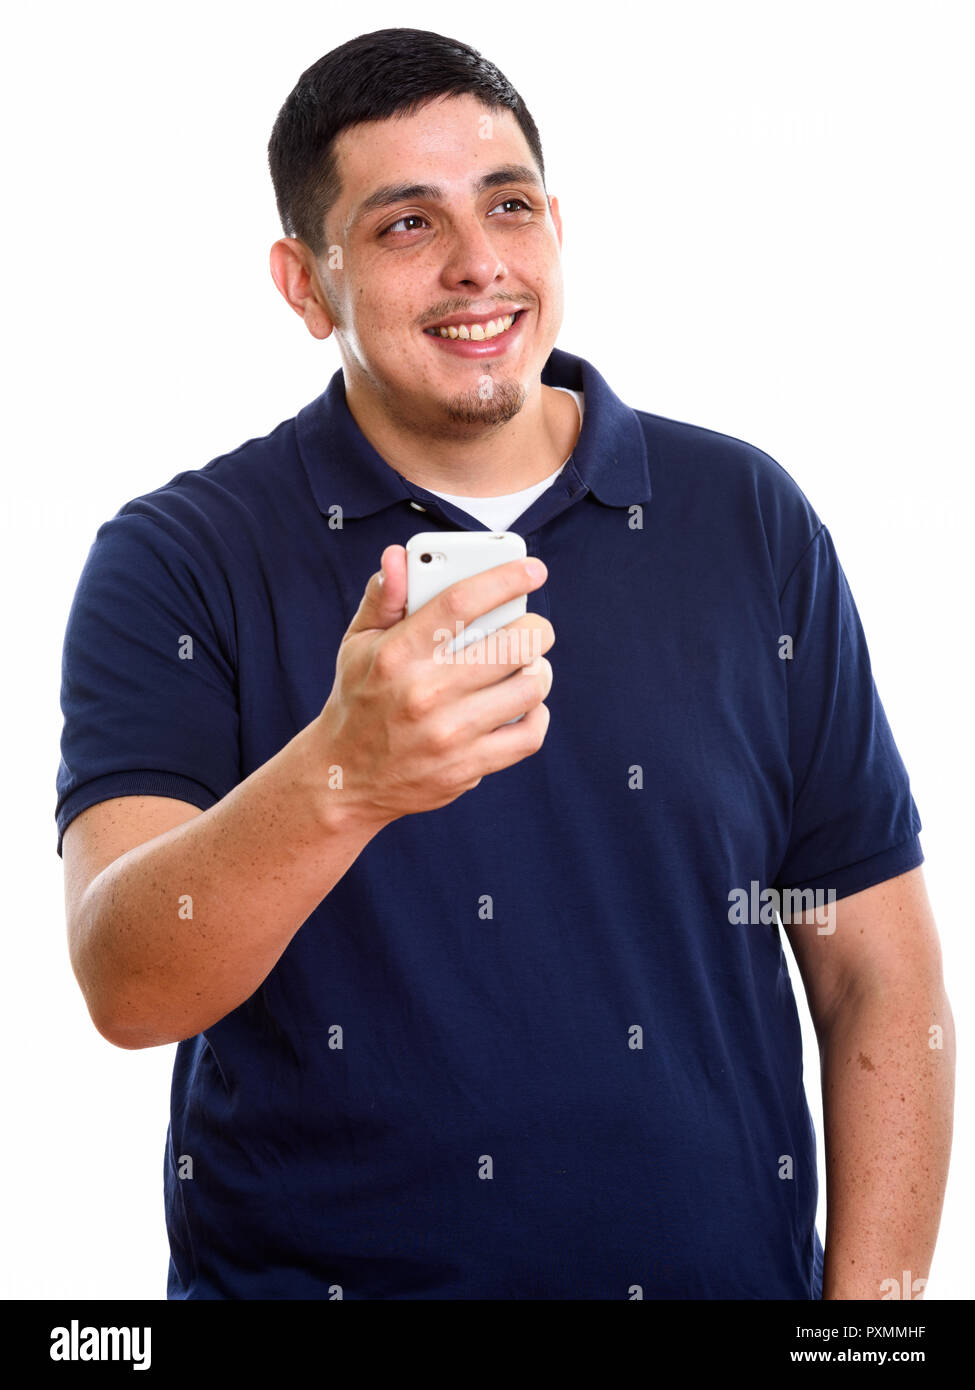 Young happy Senior man smiling while holding mobile phone Banque D'Images